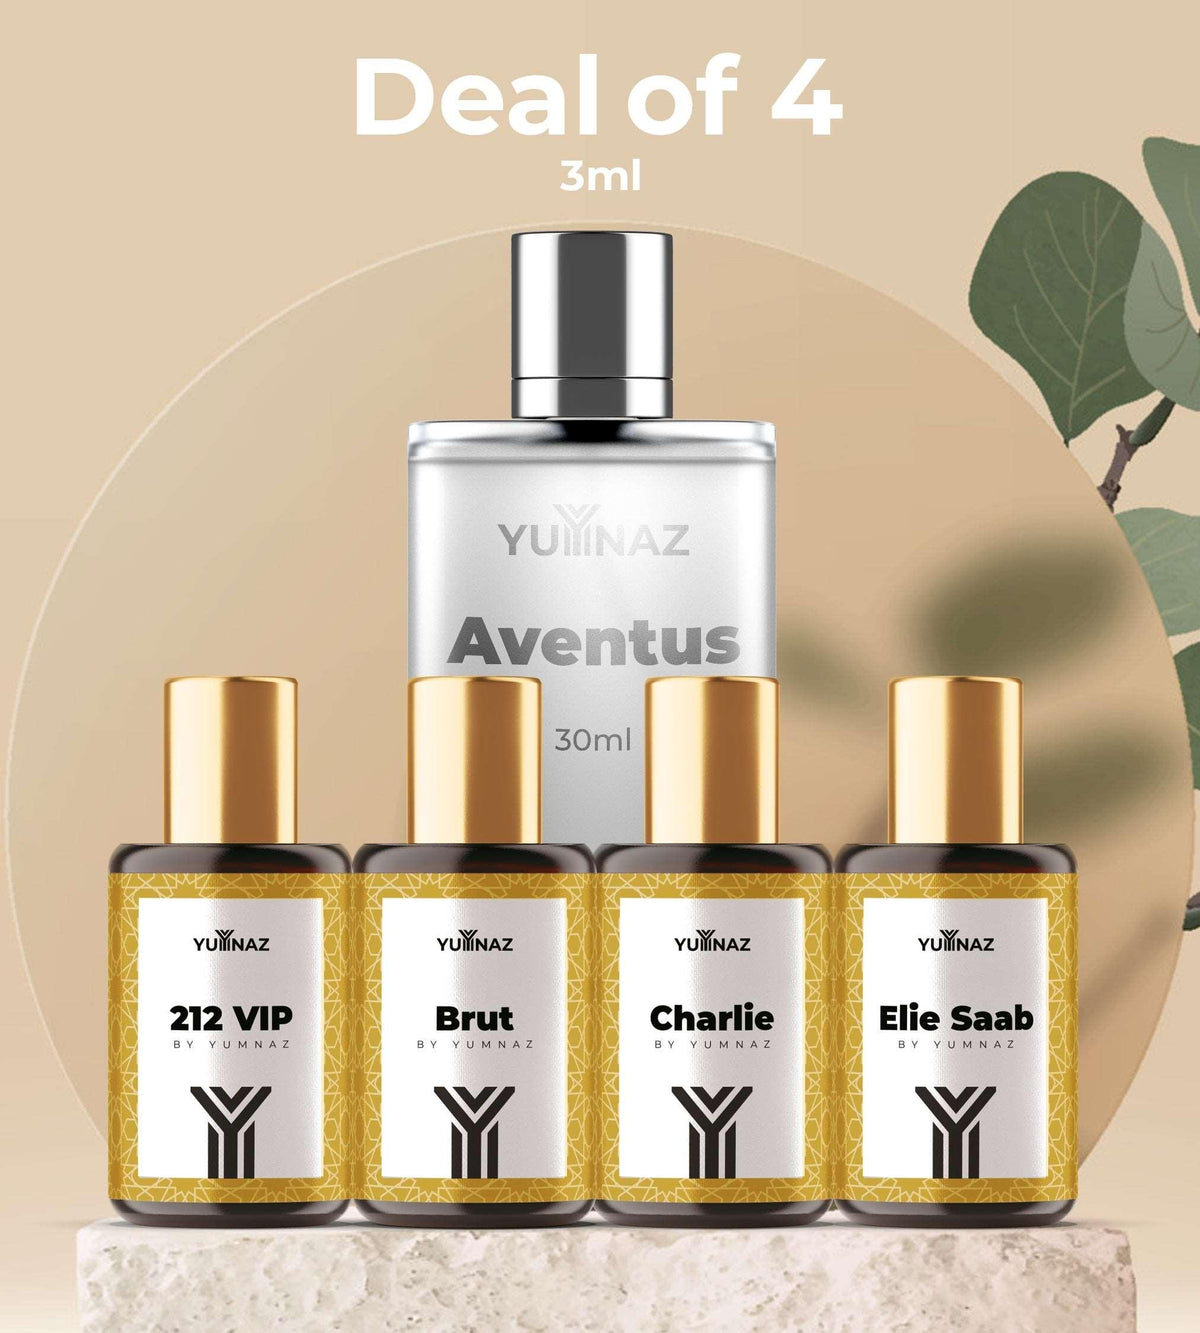 4-Day Deal: Get 4 Attars and 1 Perfume Set at Amazing Prices - Perfume Price in Pakistan